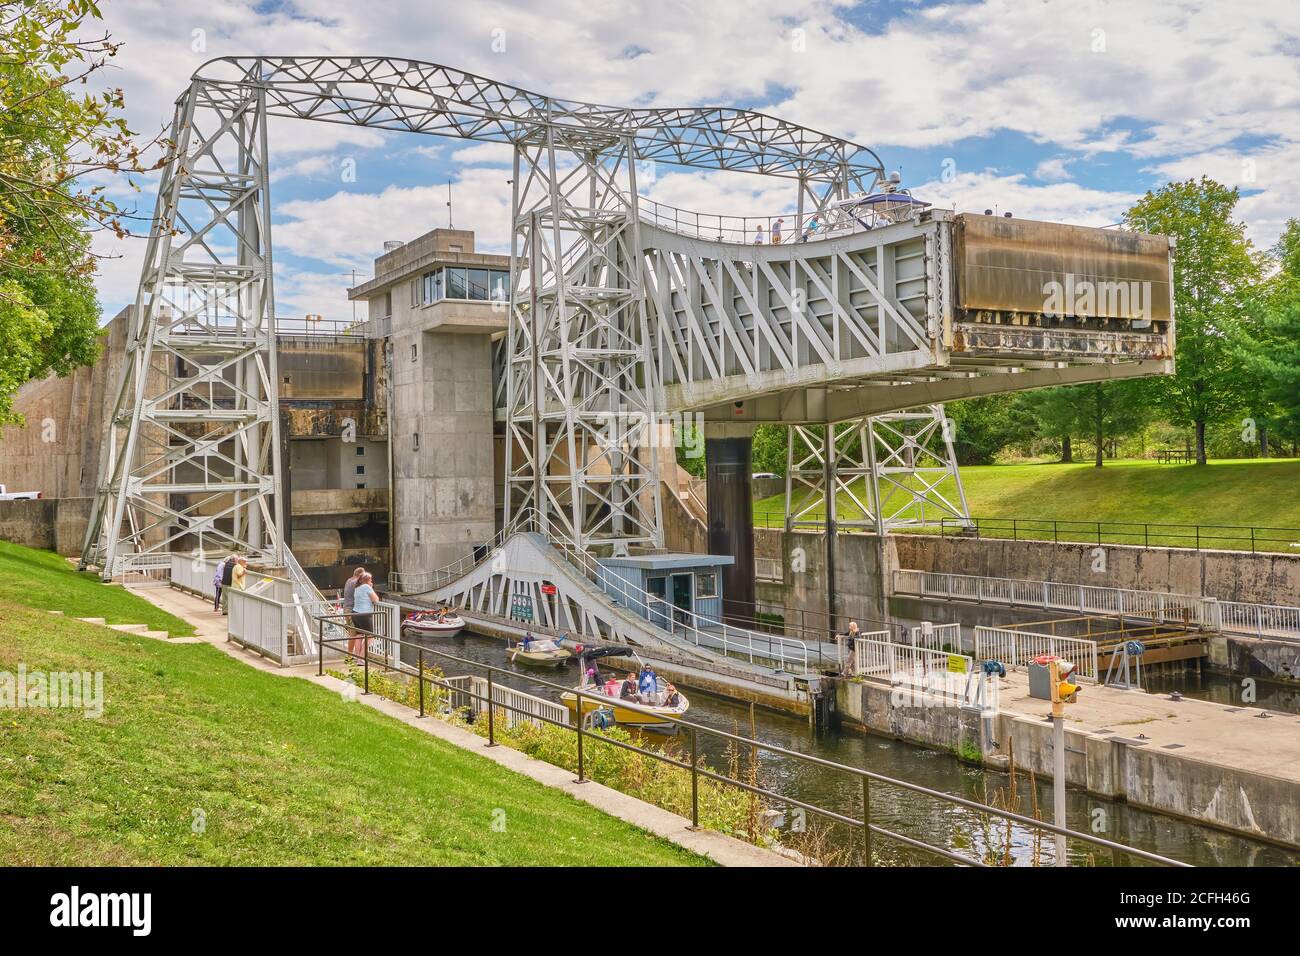 The Kirkfield Lift lock, one of a series of locks on the Trent-Severn Waterway is the second highest hydraulic boat lift in the world at 15 metres or Stock Photo